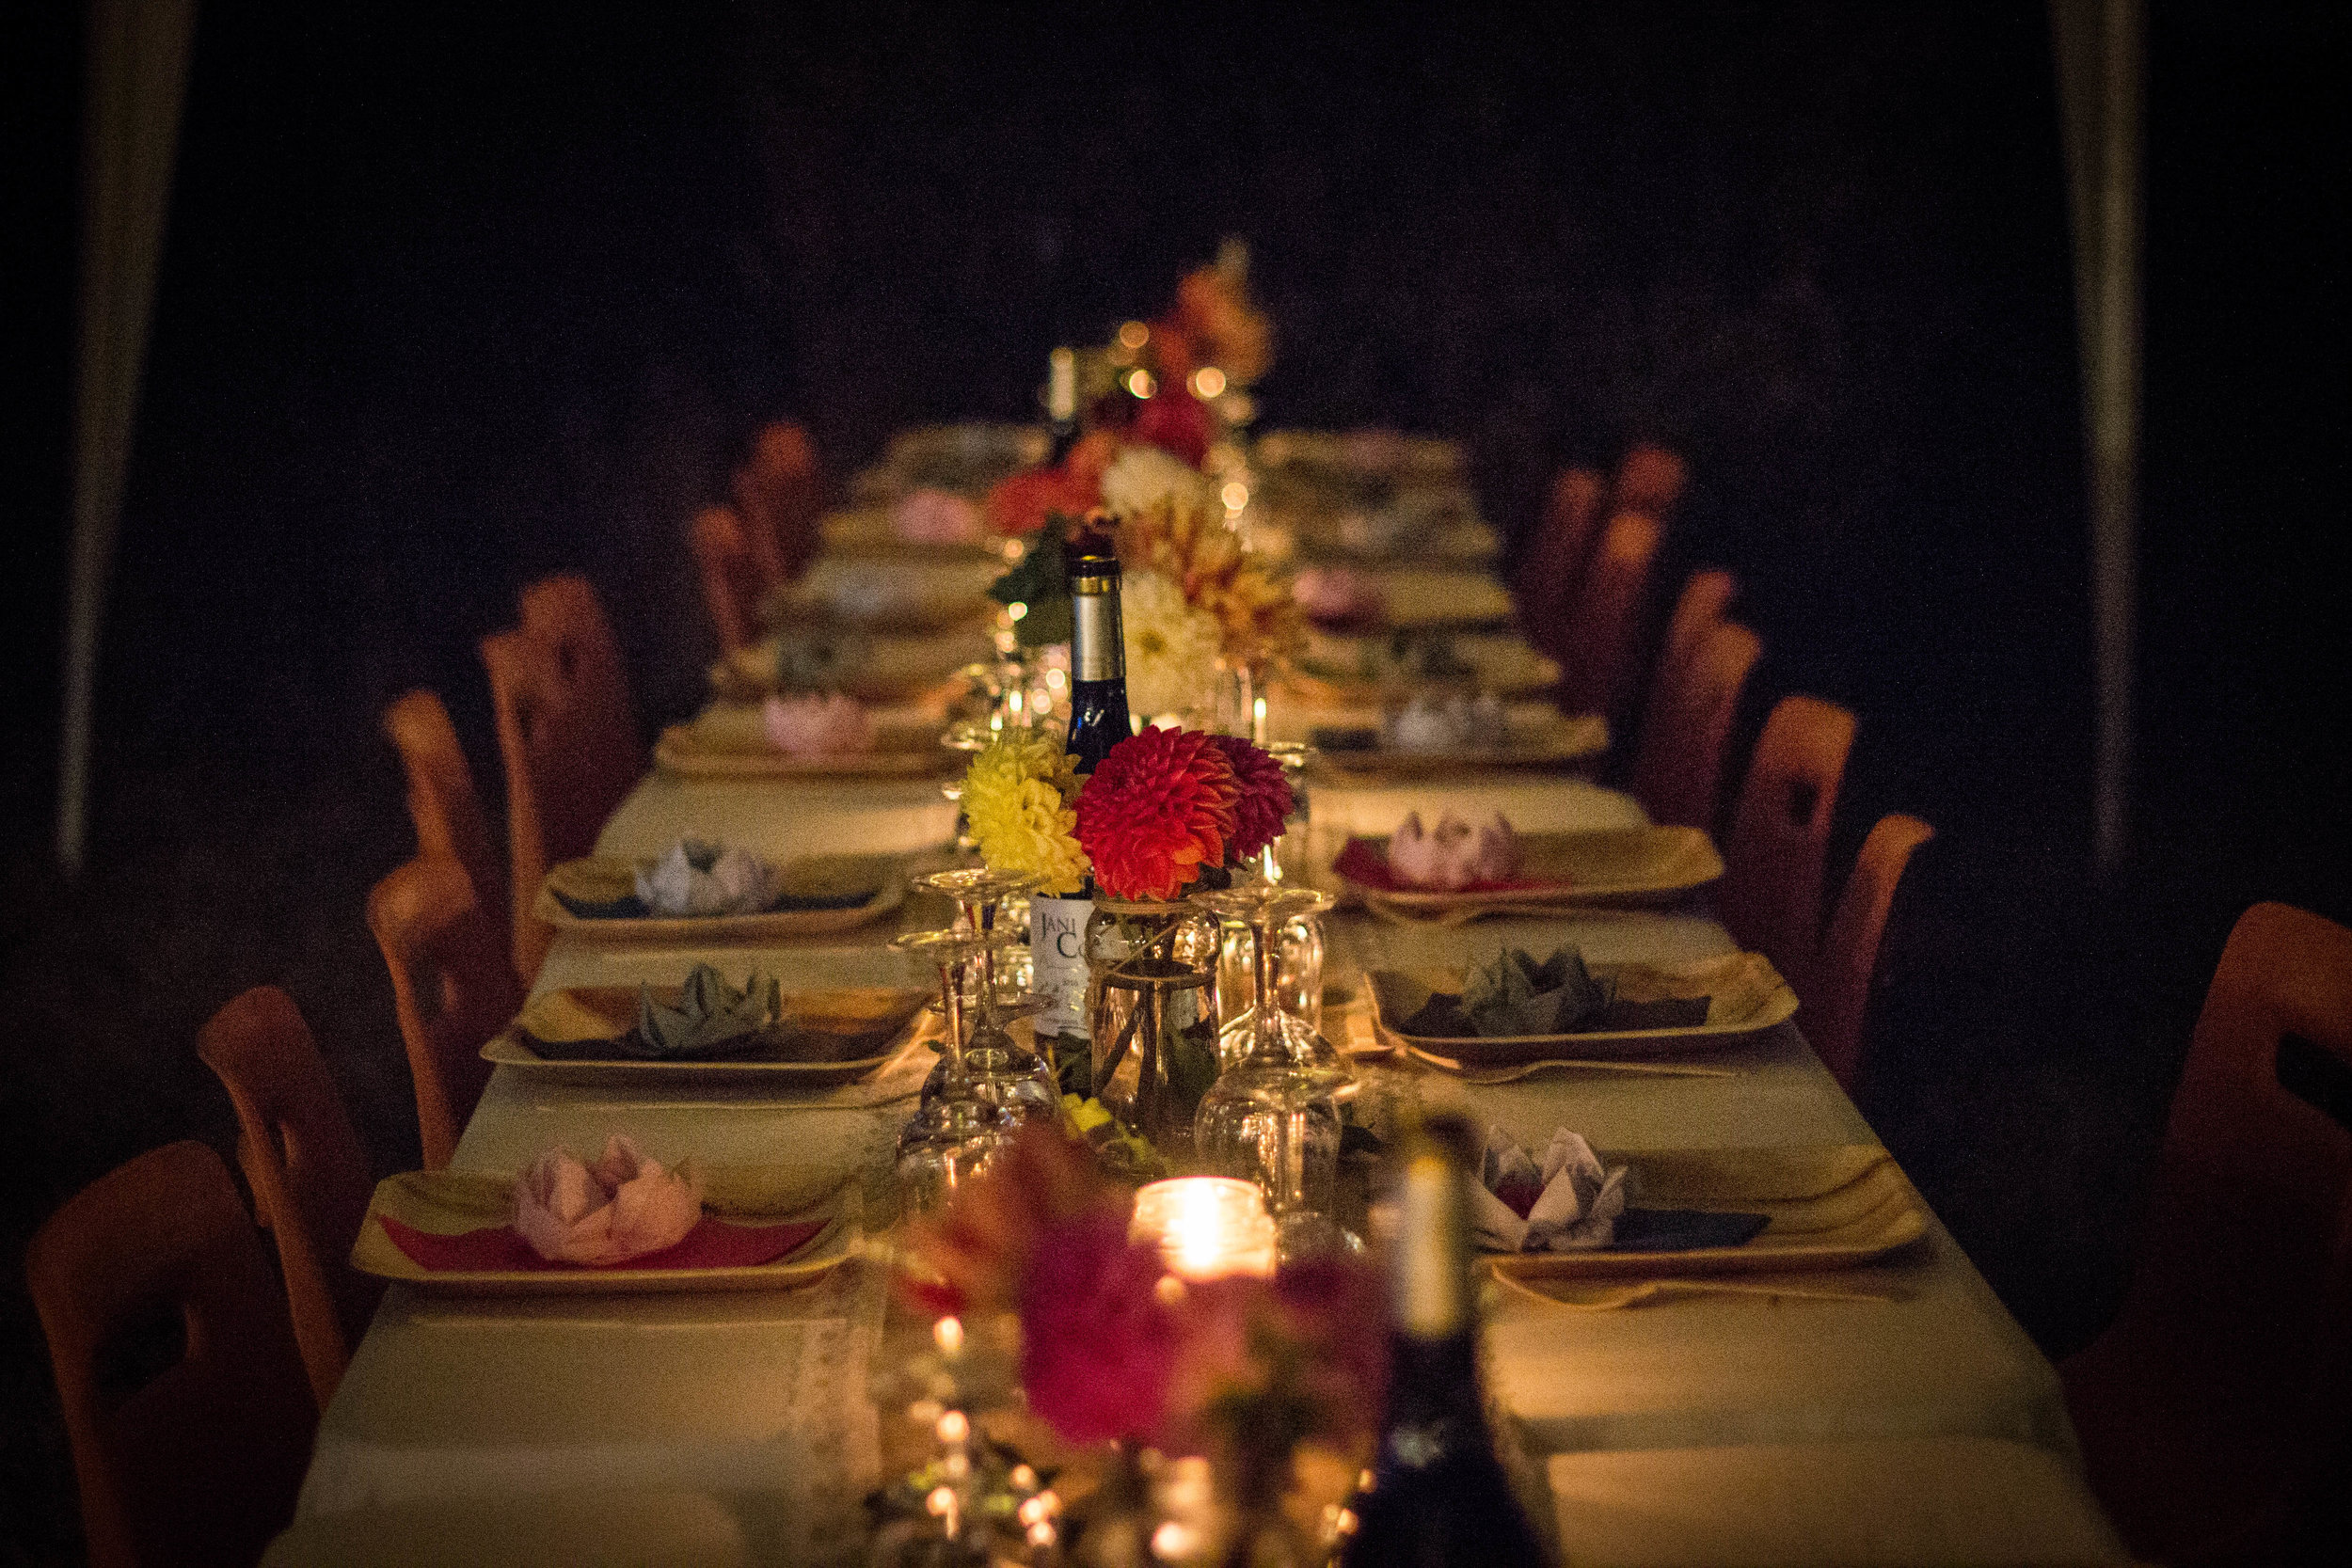 Long Table Set for Private Dining Event